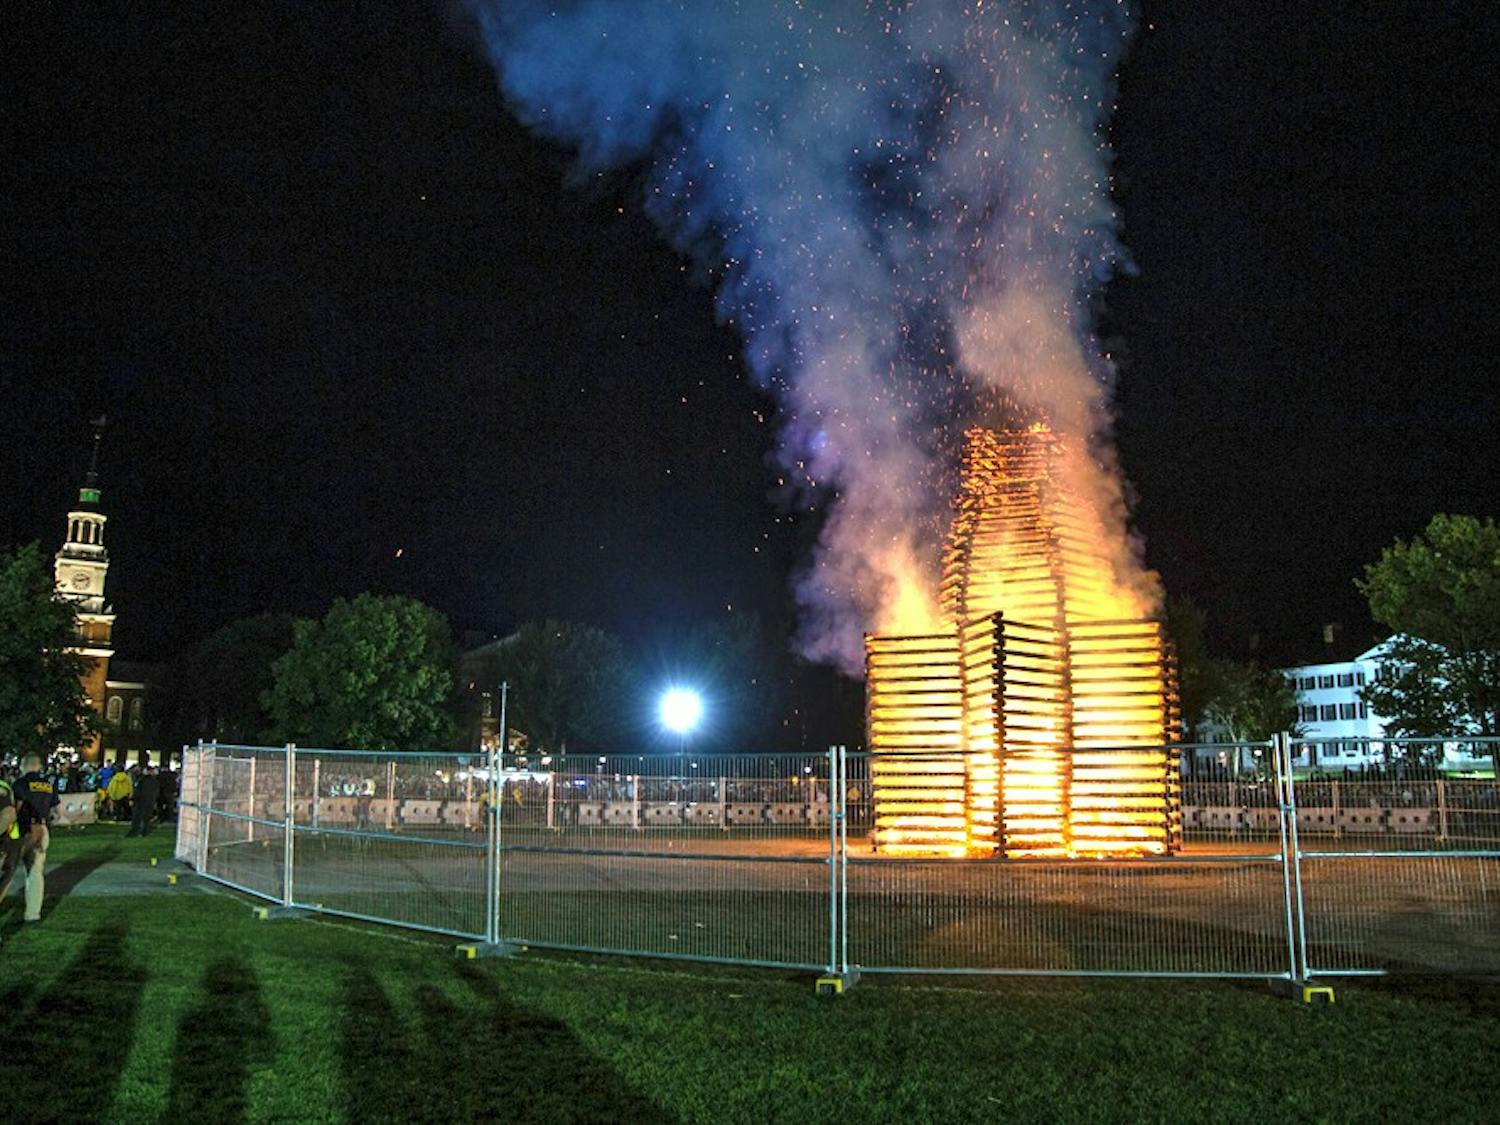 The College installed a fence around the Homecoming bonfire after about 50 students touched the fire in 2016.